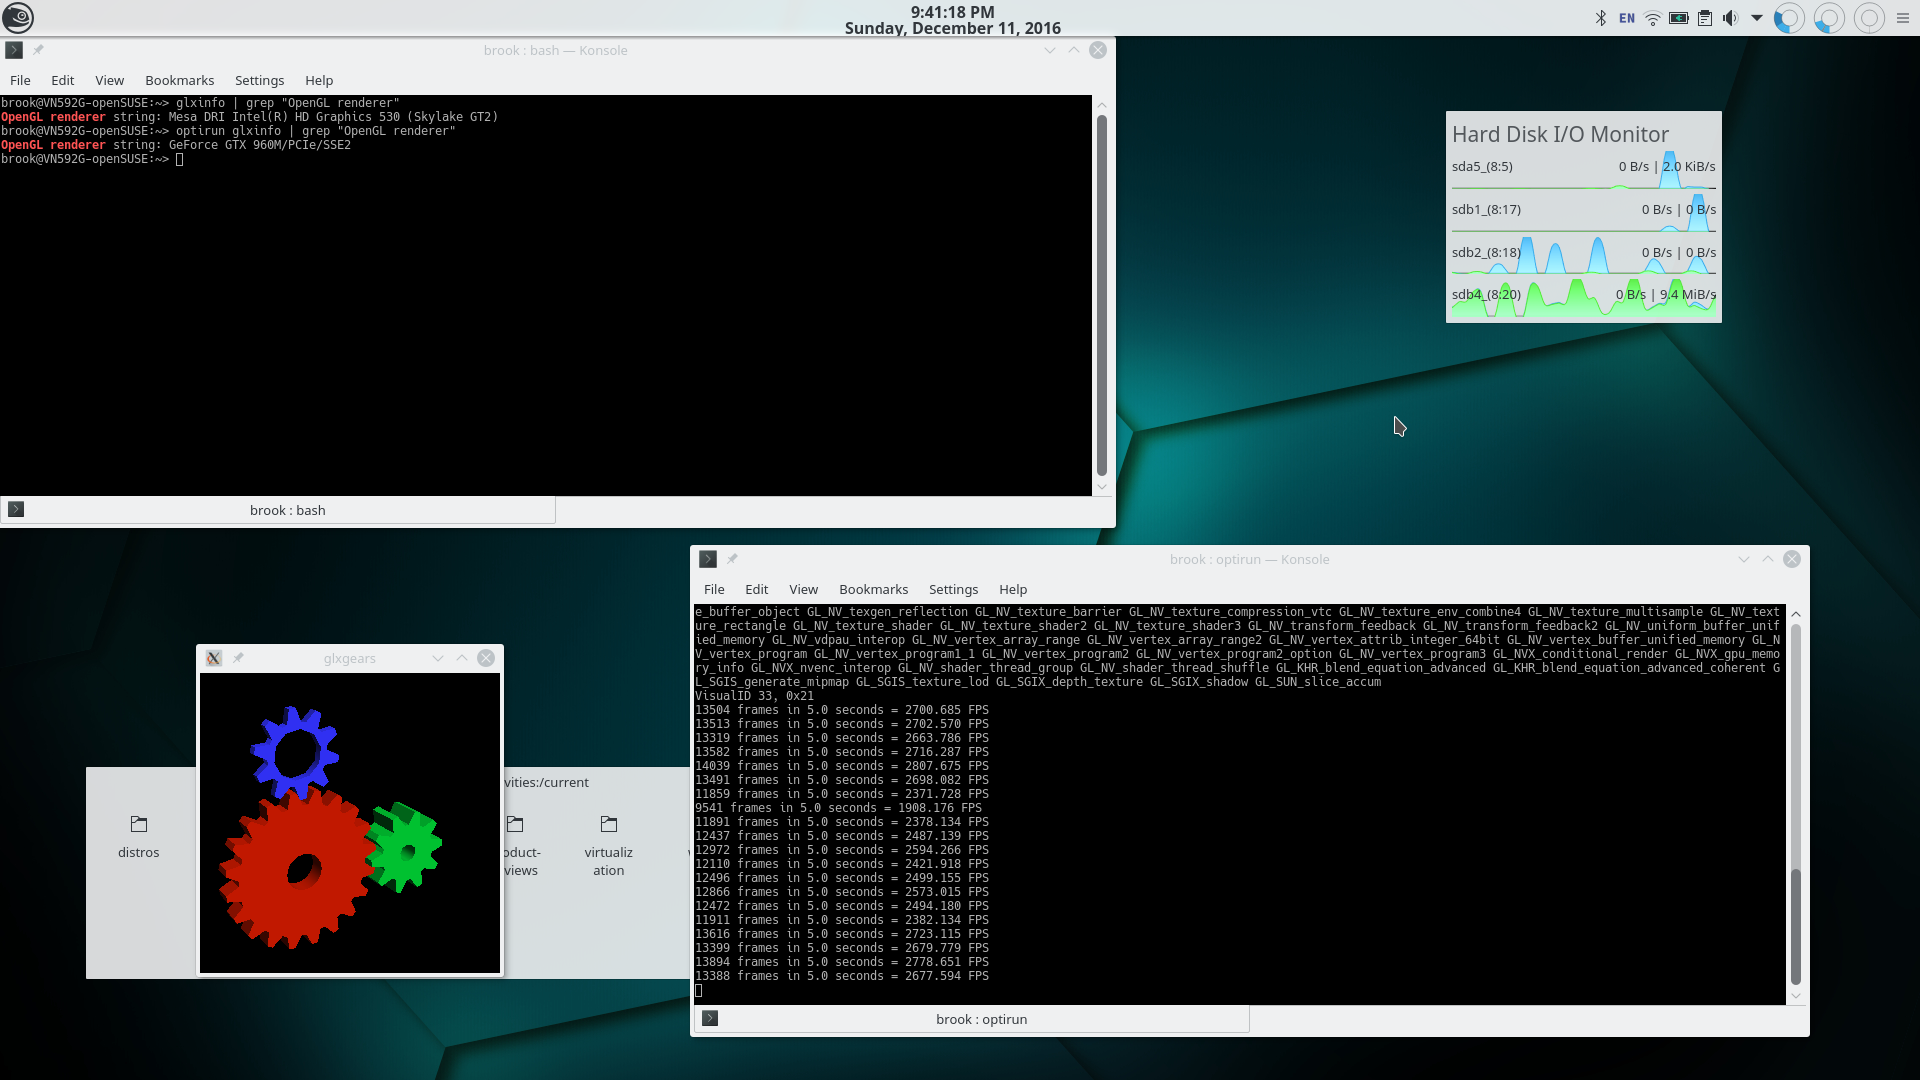 Verifying Proper Installation and Configuration of Intel/Nvidia Hybrid Graphics on openSUSE Tumbleweed. The screenshot shows openSUSE Tumbleweed with KDE Plasma 5. In the top left corner a <samp>Konsole</samp> terminal is showing the output of glxinfo | grep 'OpenGL renderer' and glxinfo | grep 'OpenGL renderer'. In the first case glxinfo is using the default graphics processor and shows that the Intel HD Graphics 530 is the 'OpenGL renderer'. In the second case glxinfo shows that the 'OpenGL renderer' is the [Nvidia] GeForce GTX 960M -- the discrete processor. The <samp>Konsole</samp> terminal at the lower right shows the framerates when using the discrete graphics card -- over approximately forty times higher framrates.